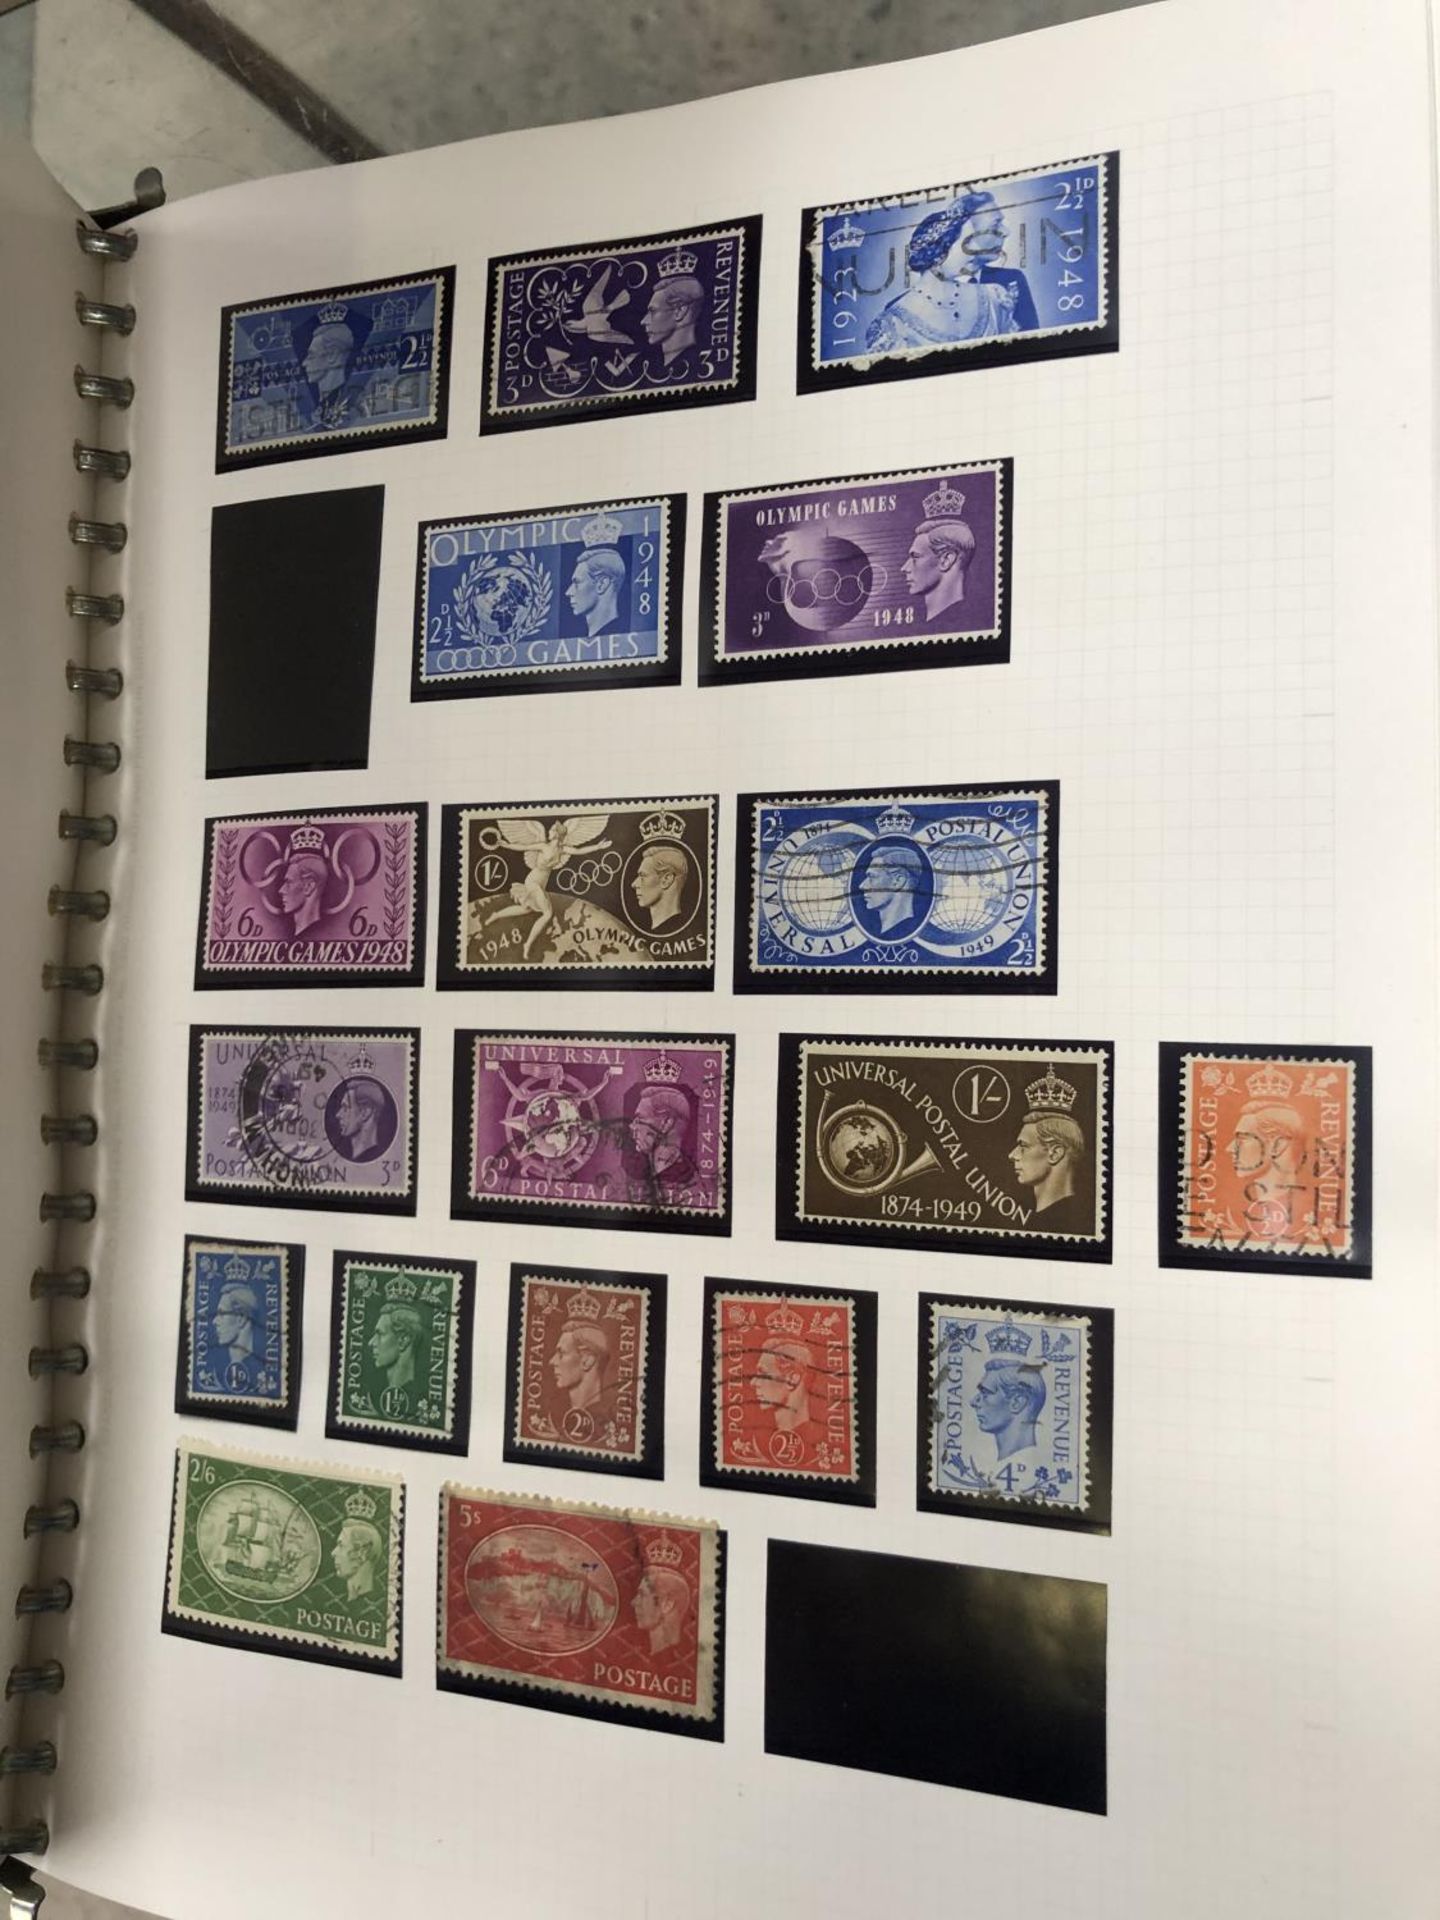 A GREAT BRITAIN STAMP ALBUM, SEE PHOTOS - Image 6 of 10